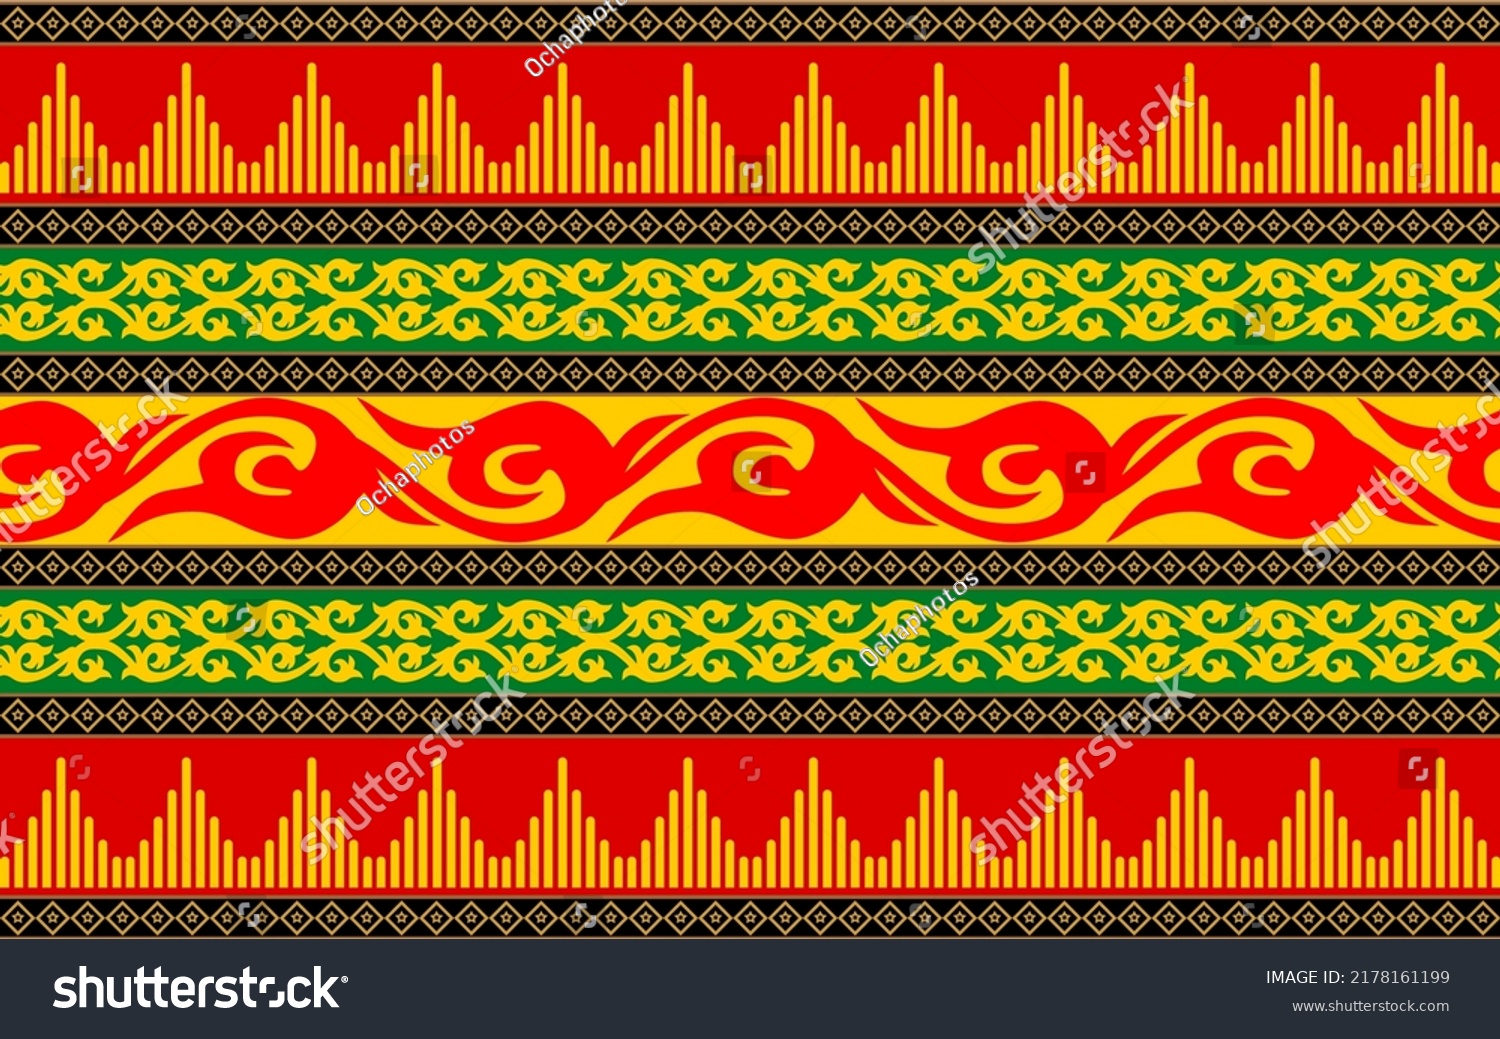 SVG of Acehnese batik motifs. Traditional art pattern from the province of Aceh. Indonesia svg